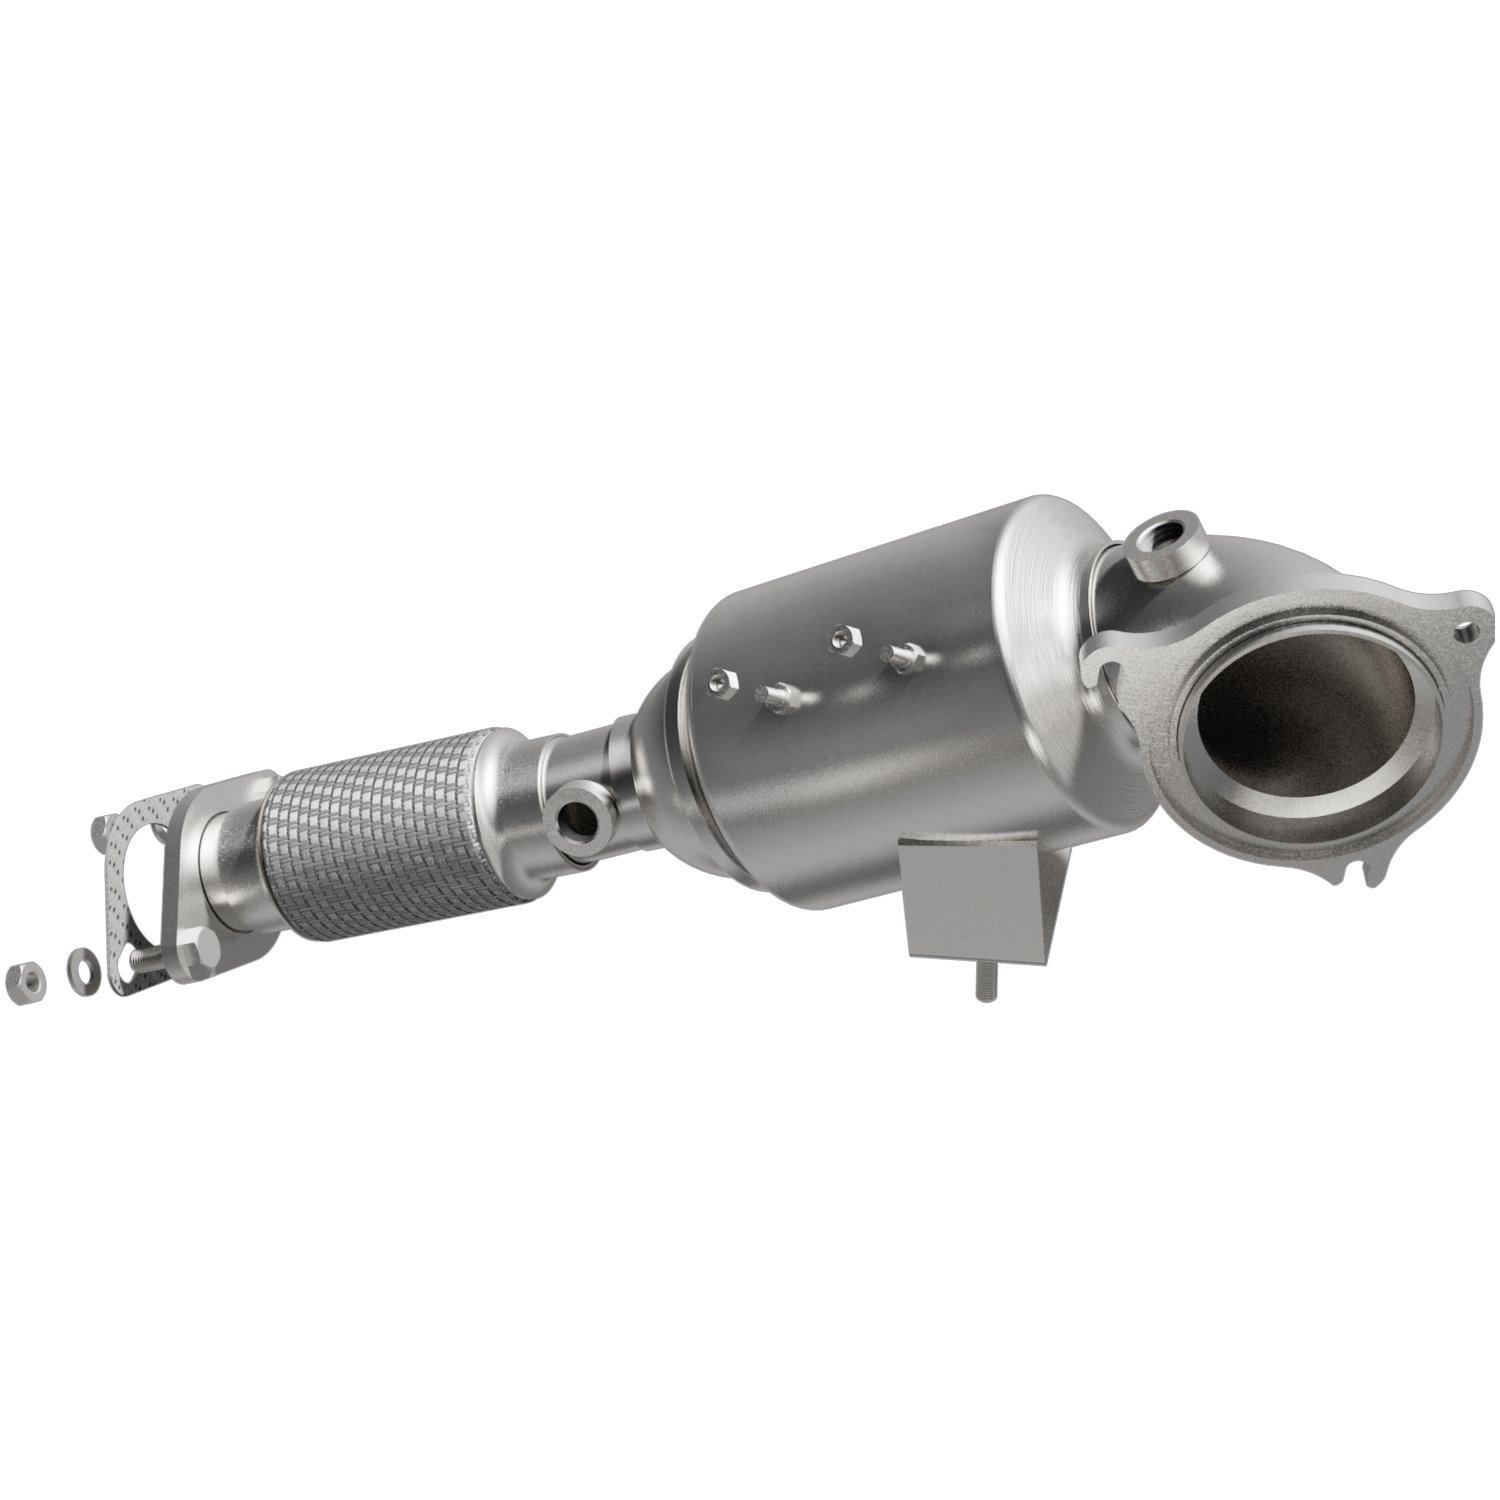 2014-2019 Ford Fiesta OEM Grade Federal / EPA Compliant Direct-Fit Catalytic Converter